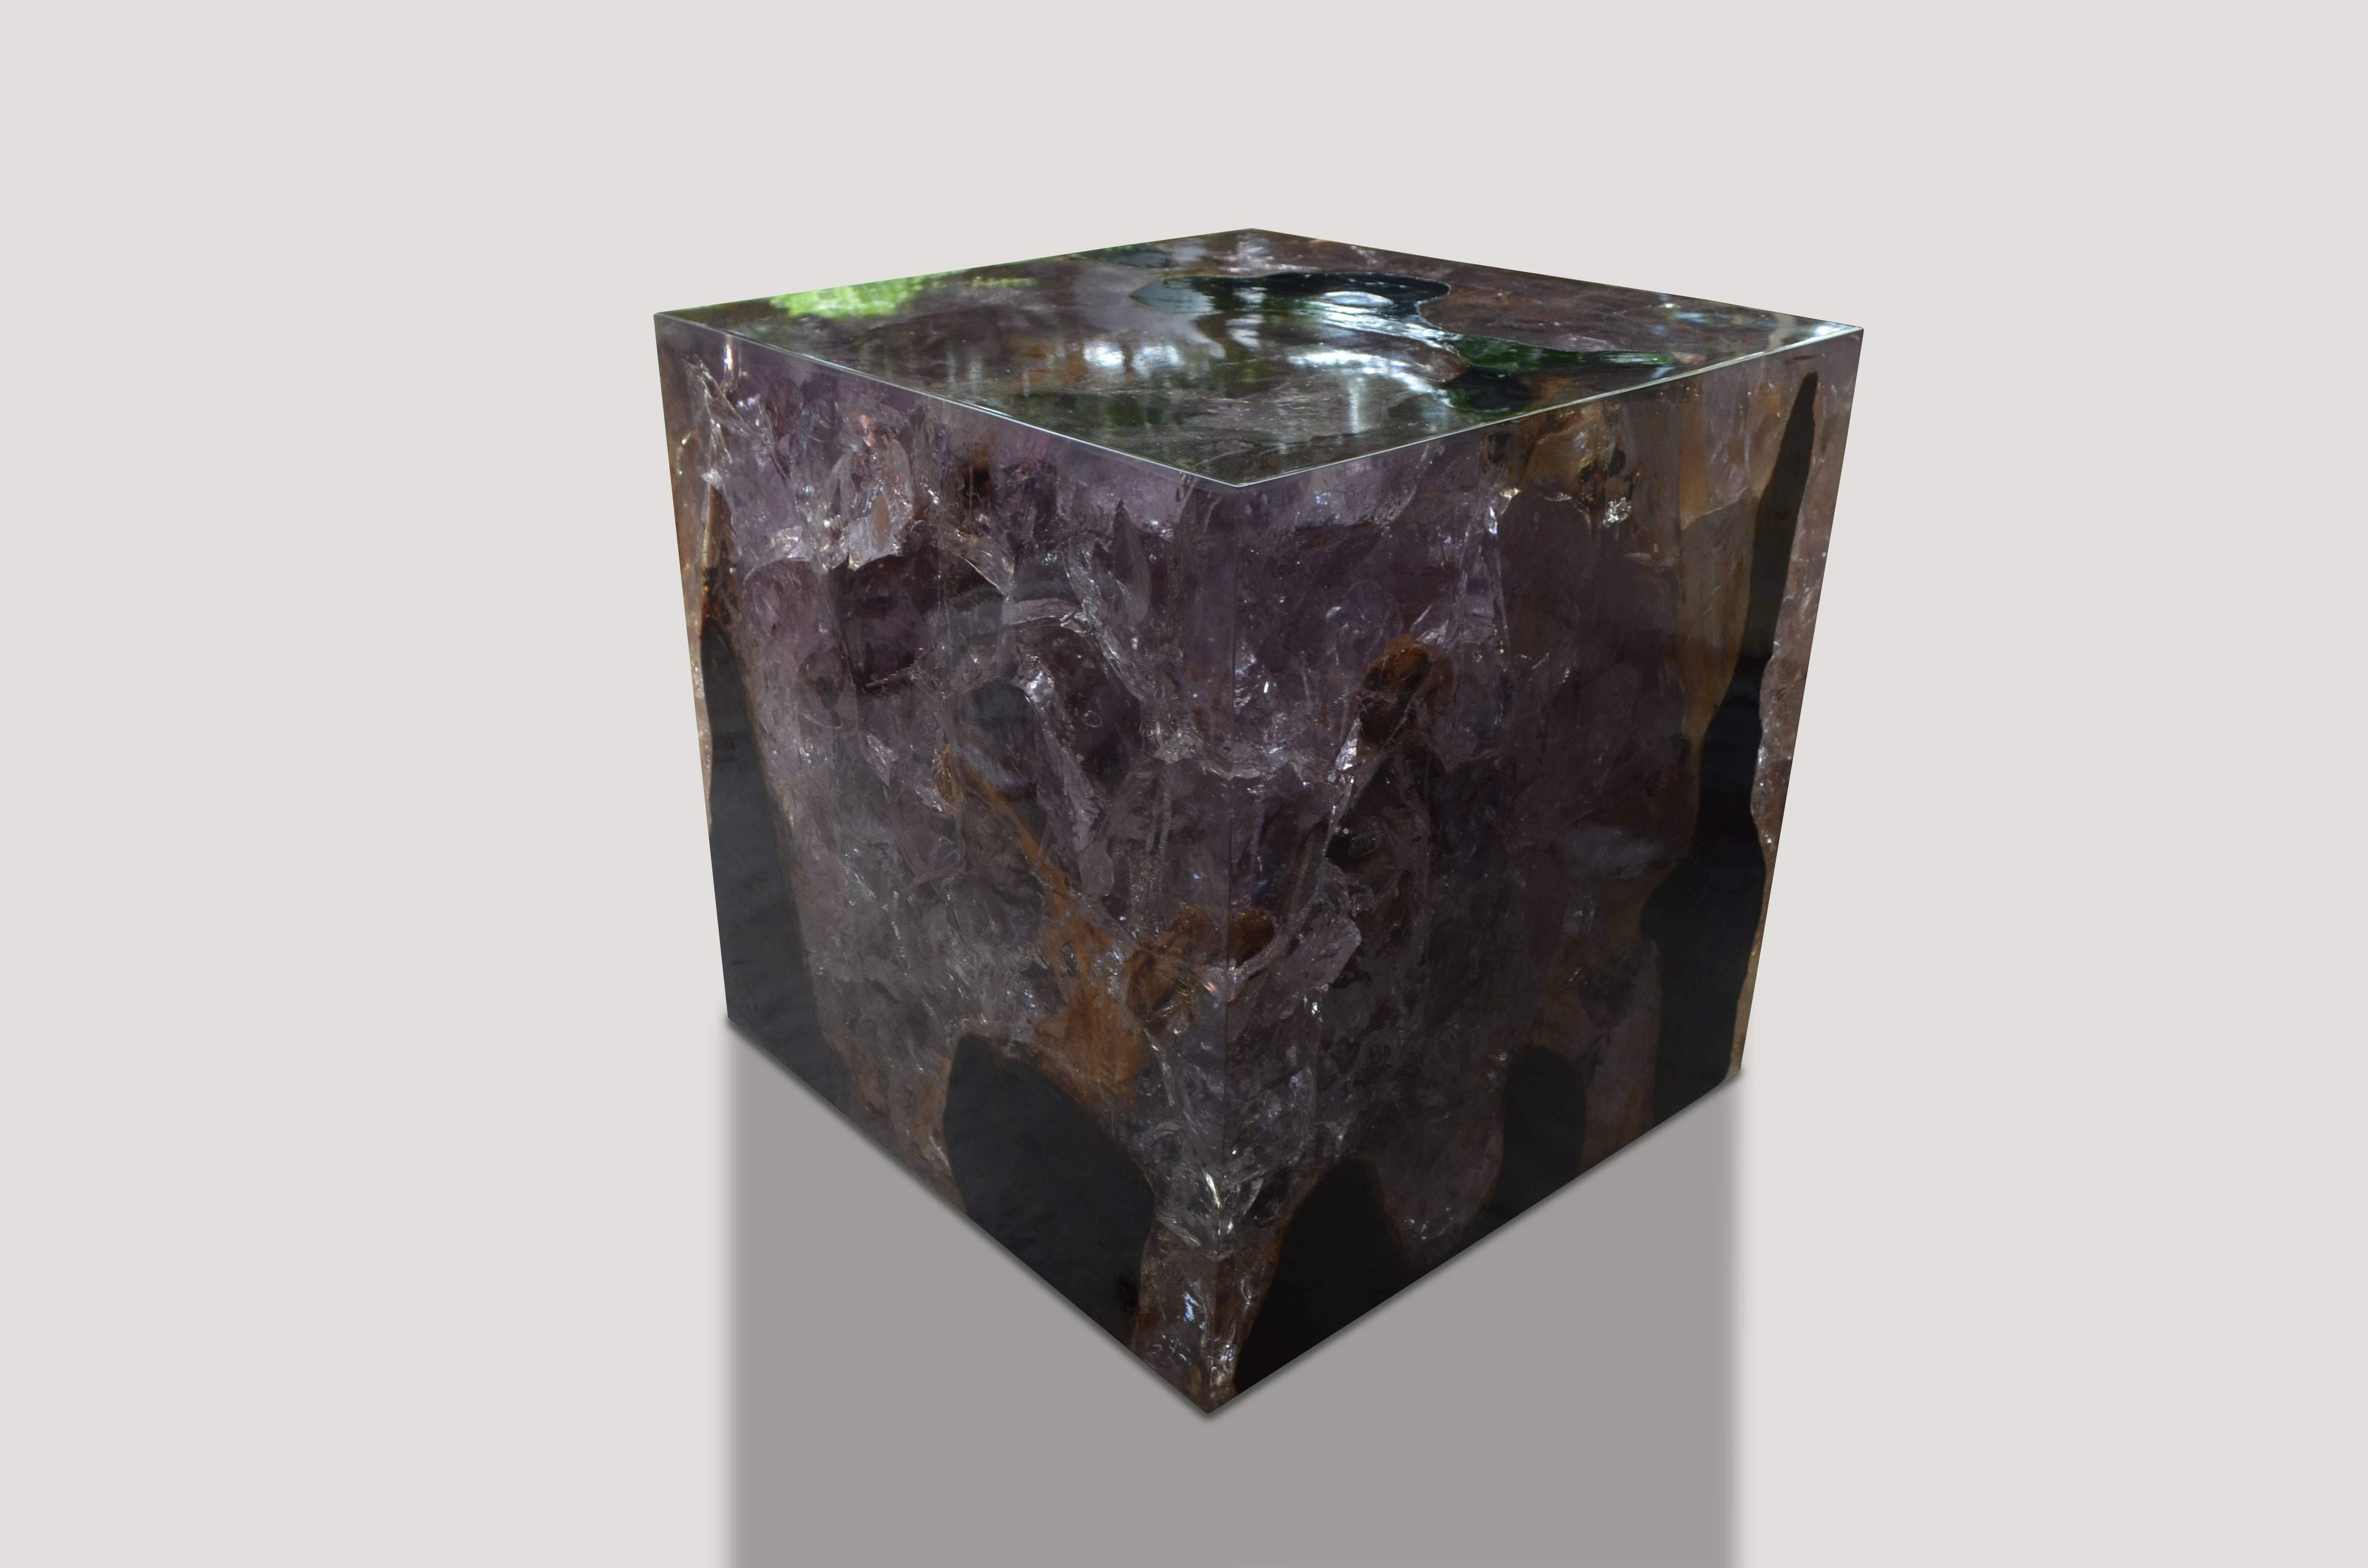 This cracked resin cocktail table is made from reclaimed teak infused with clear resin. A dramatic piece due to the depth of the resin, which resembles a unique quartz crystal with many different facets as shown here with gold, warm tones created